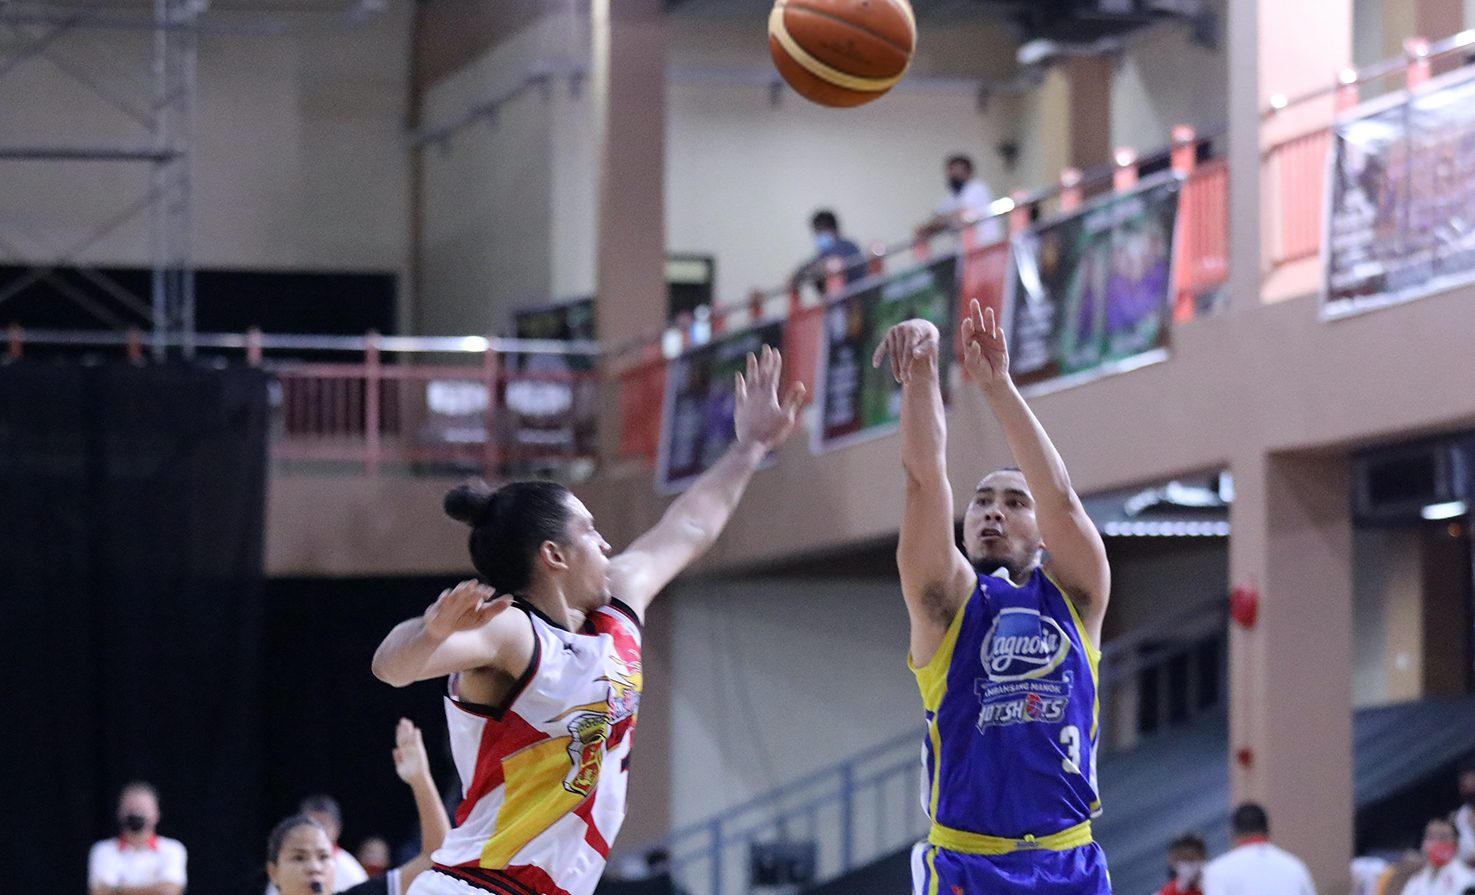 Lee named PBA Player of the Week after keeping Magnolia in hunt for playoff bonus